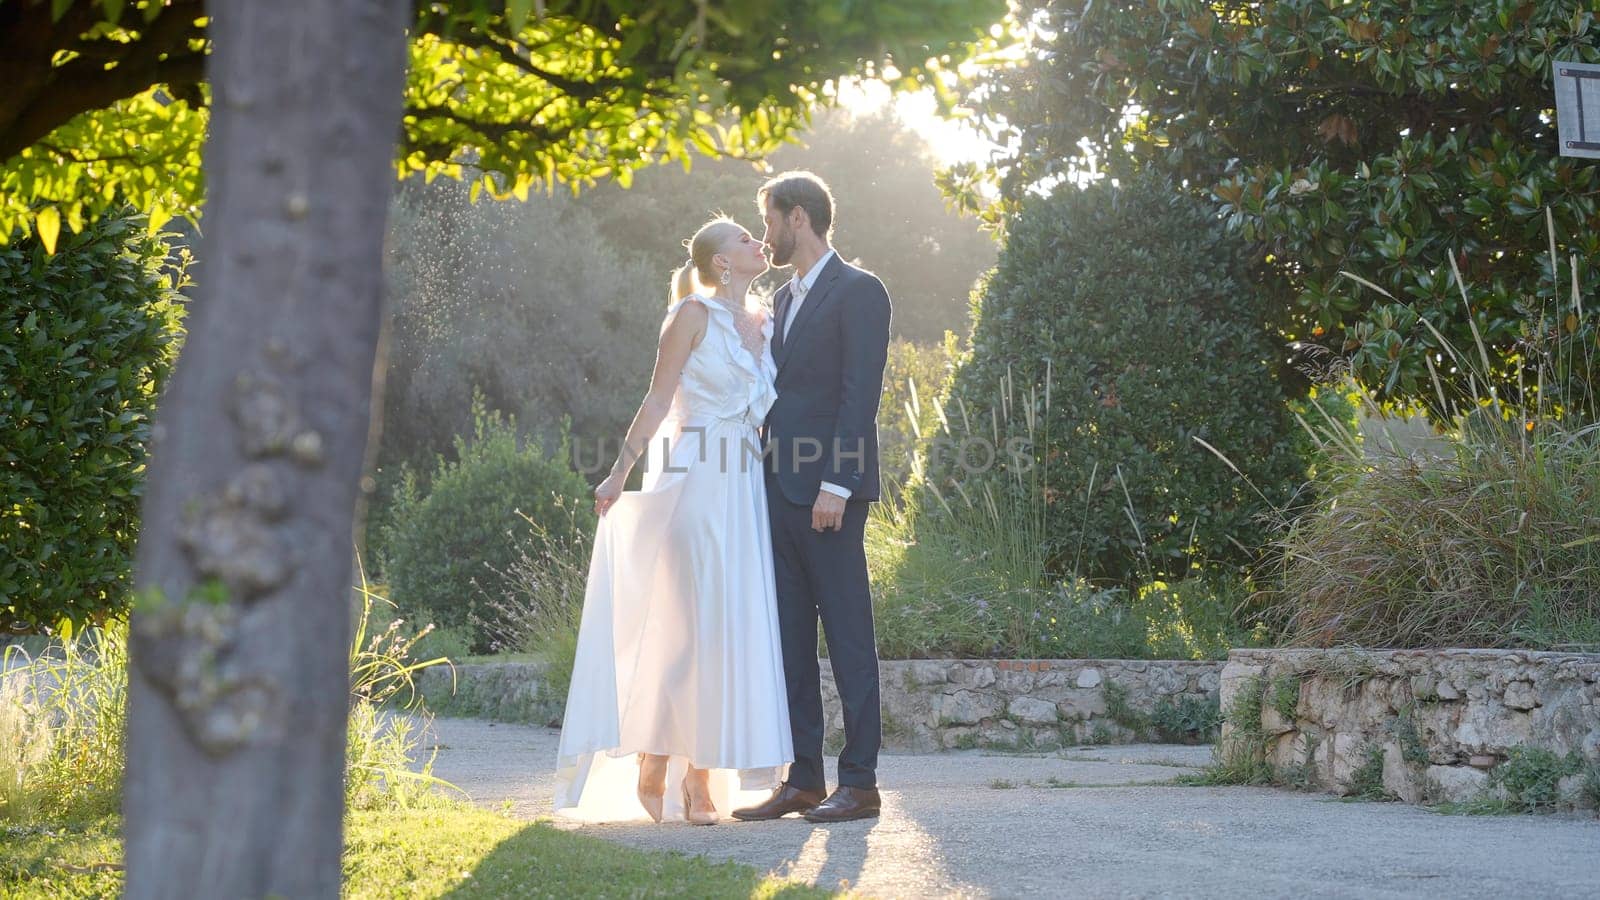 Photo shoot of the bride and groom. Action.The newlyweds are photographed in different places,some posing in the park on the street under the sun,the second on the white staircase,looking at each other tenderly. High quality 4k footage